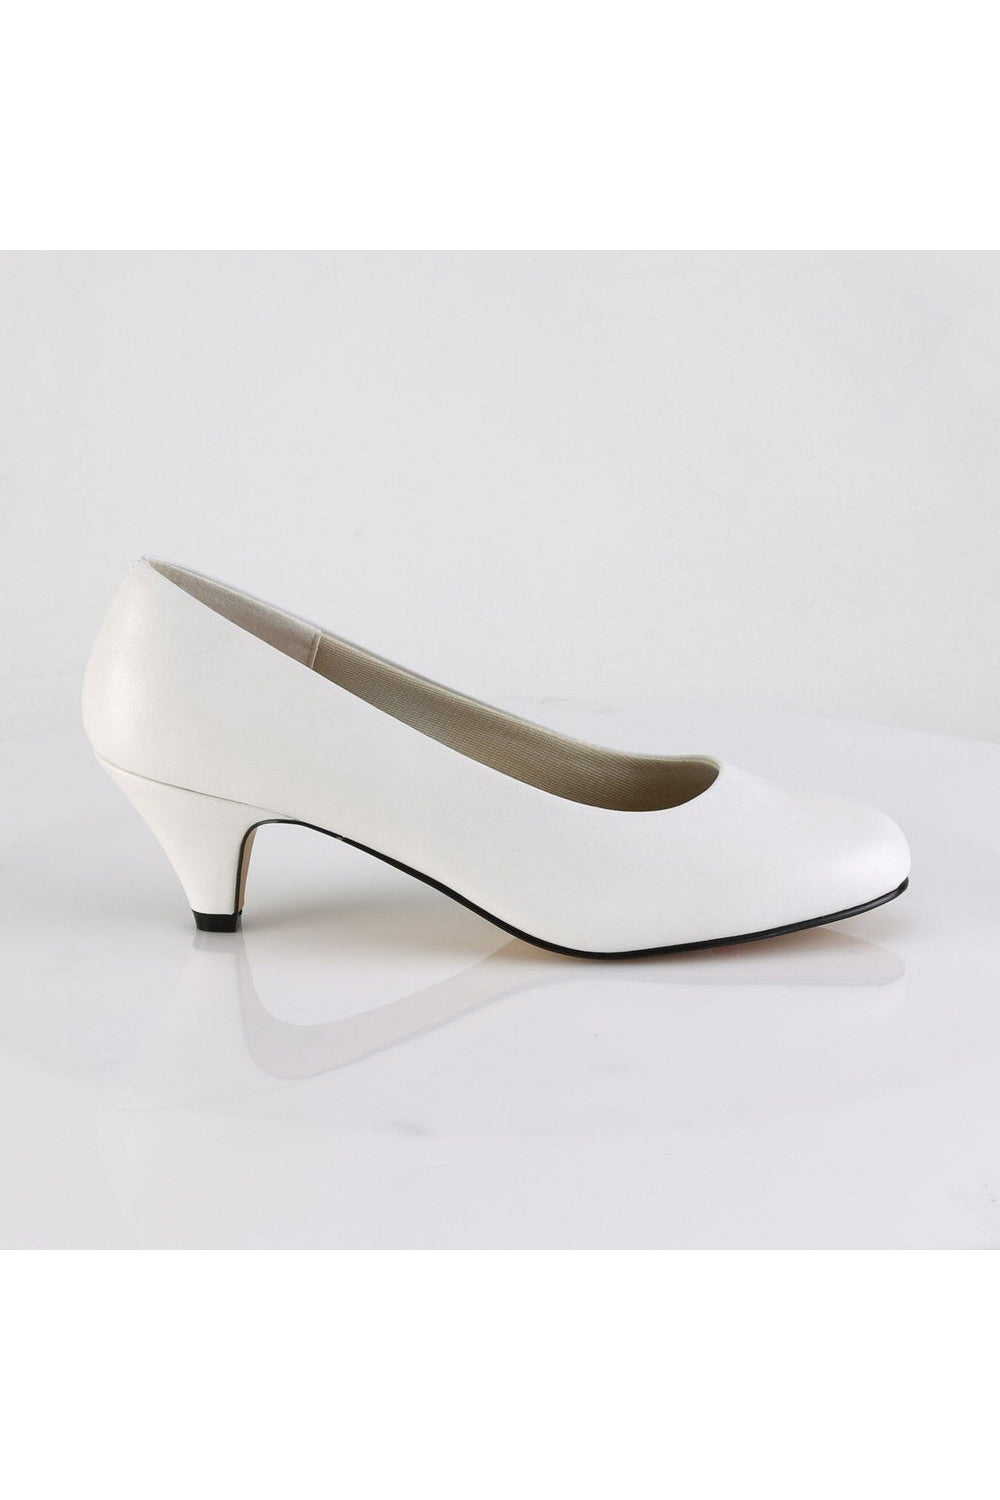 FEFE-01 Pump | White Faux Leather-Pleaser Pink Label-SEXYSHOES.COM